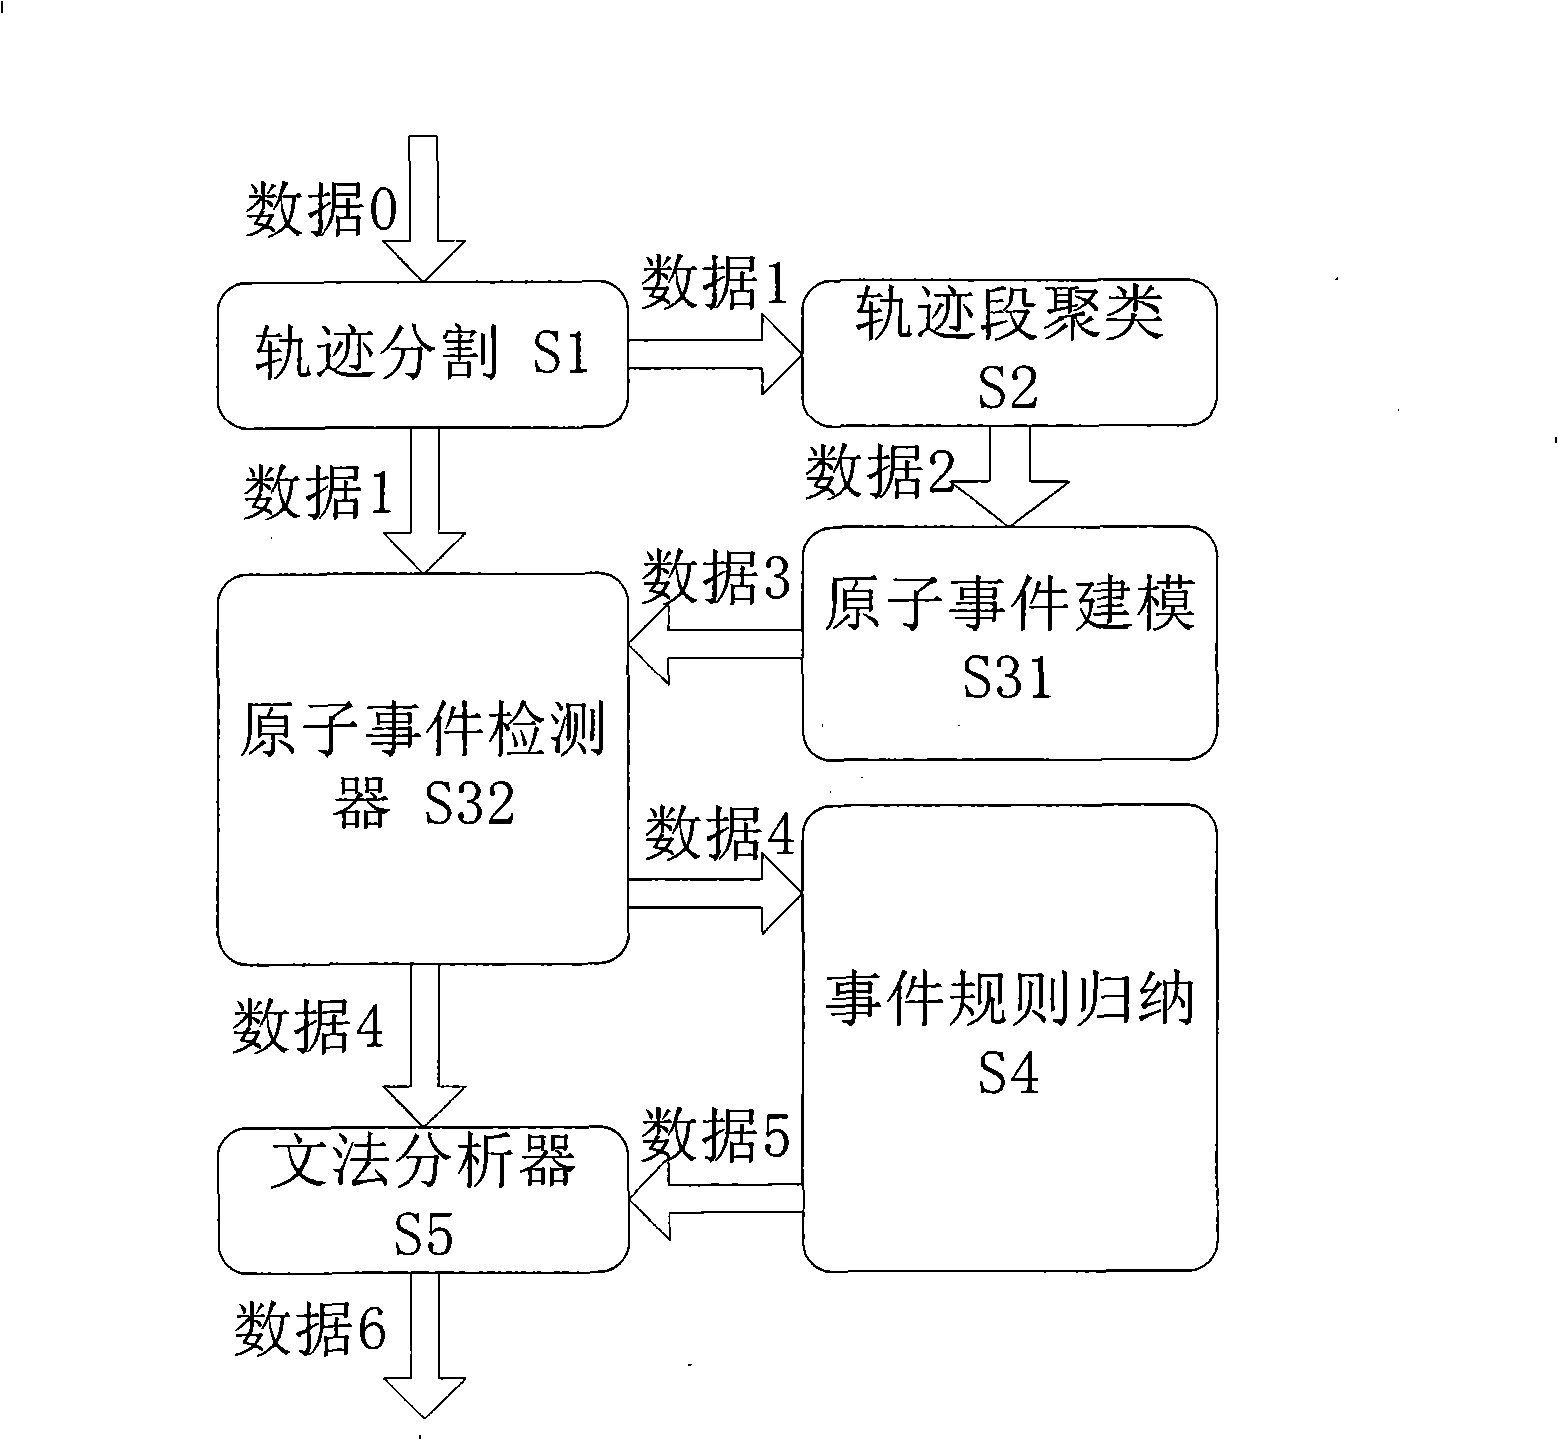 Video frequency behaviors recognition method based on track sequence analysis and rule induction